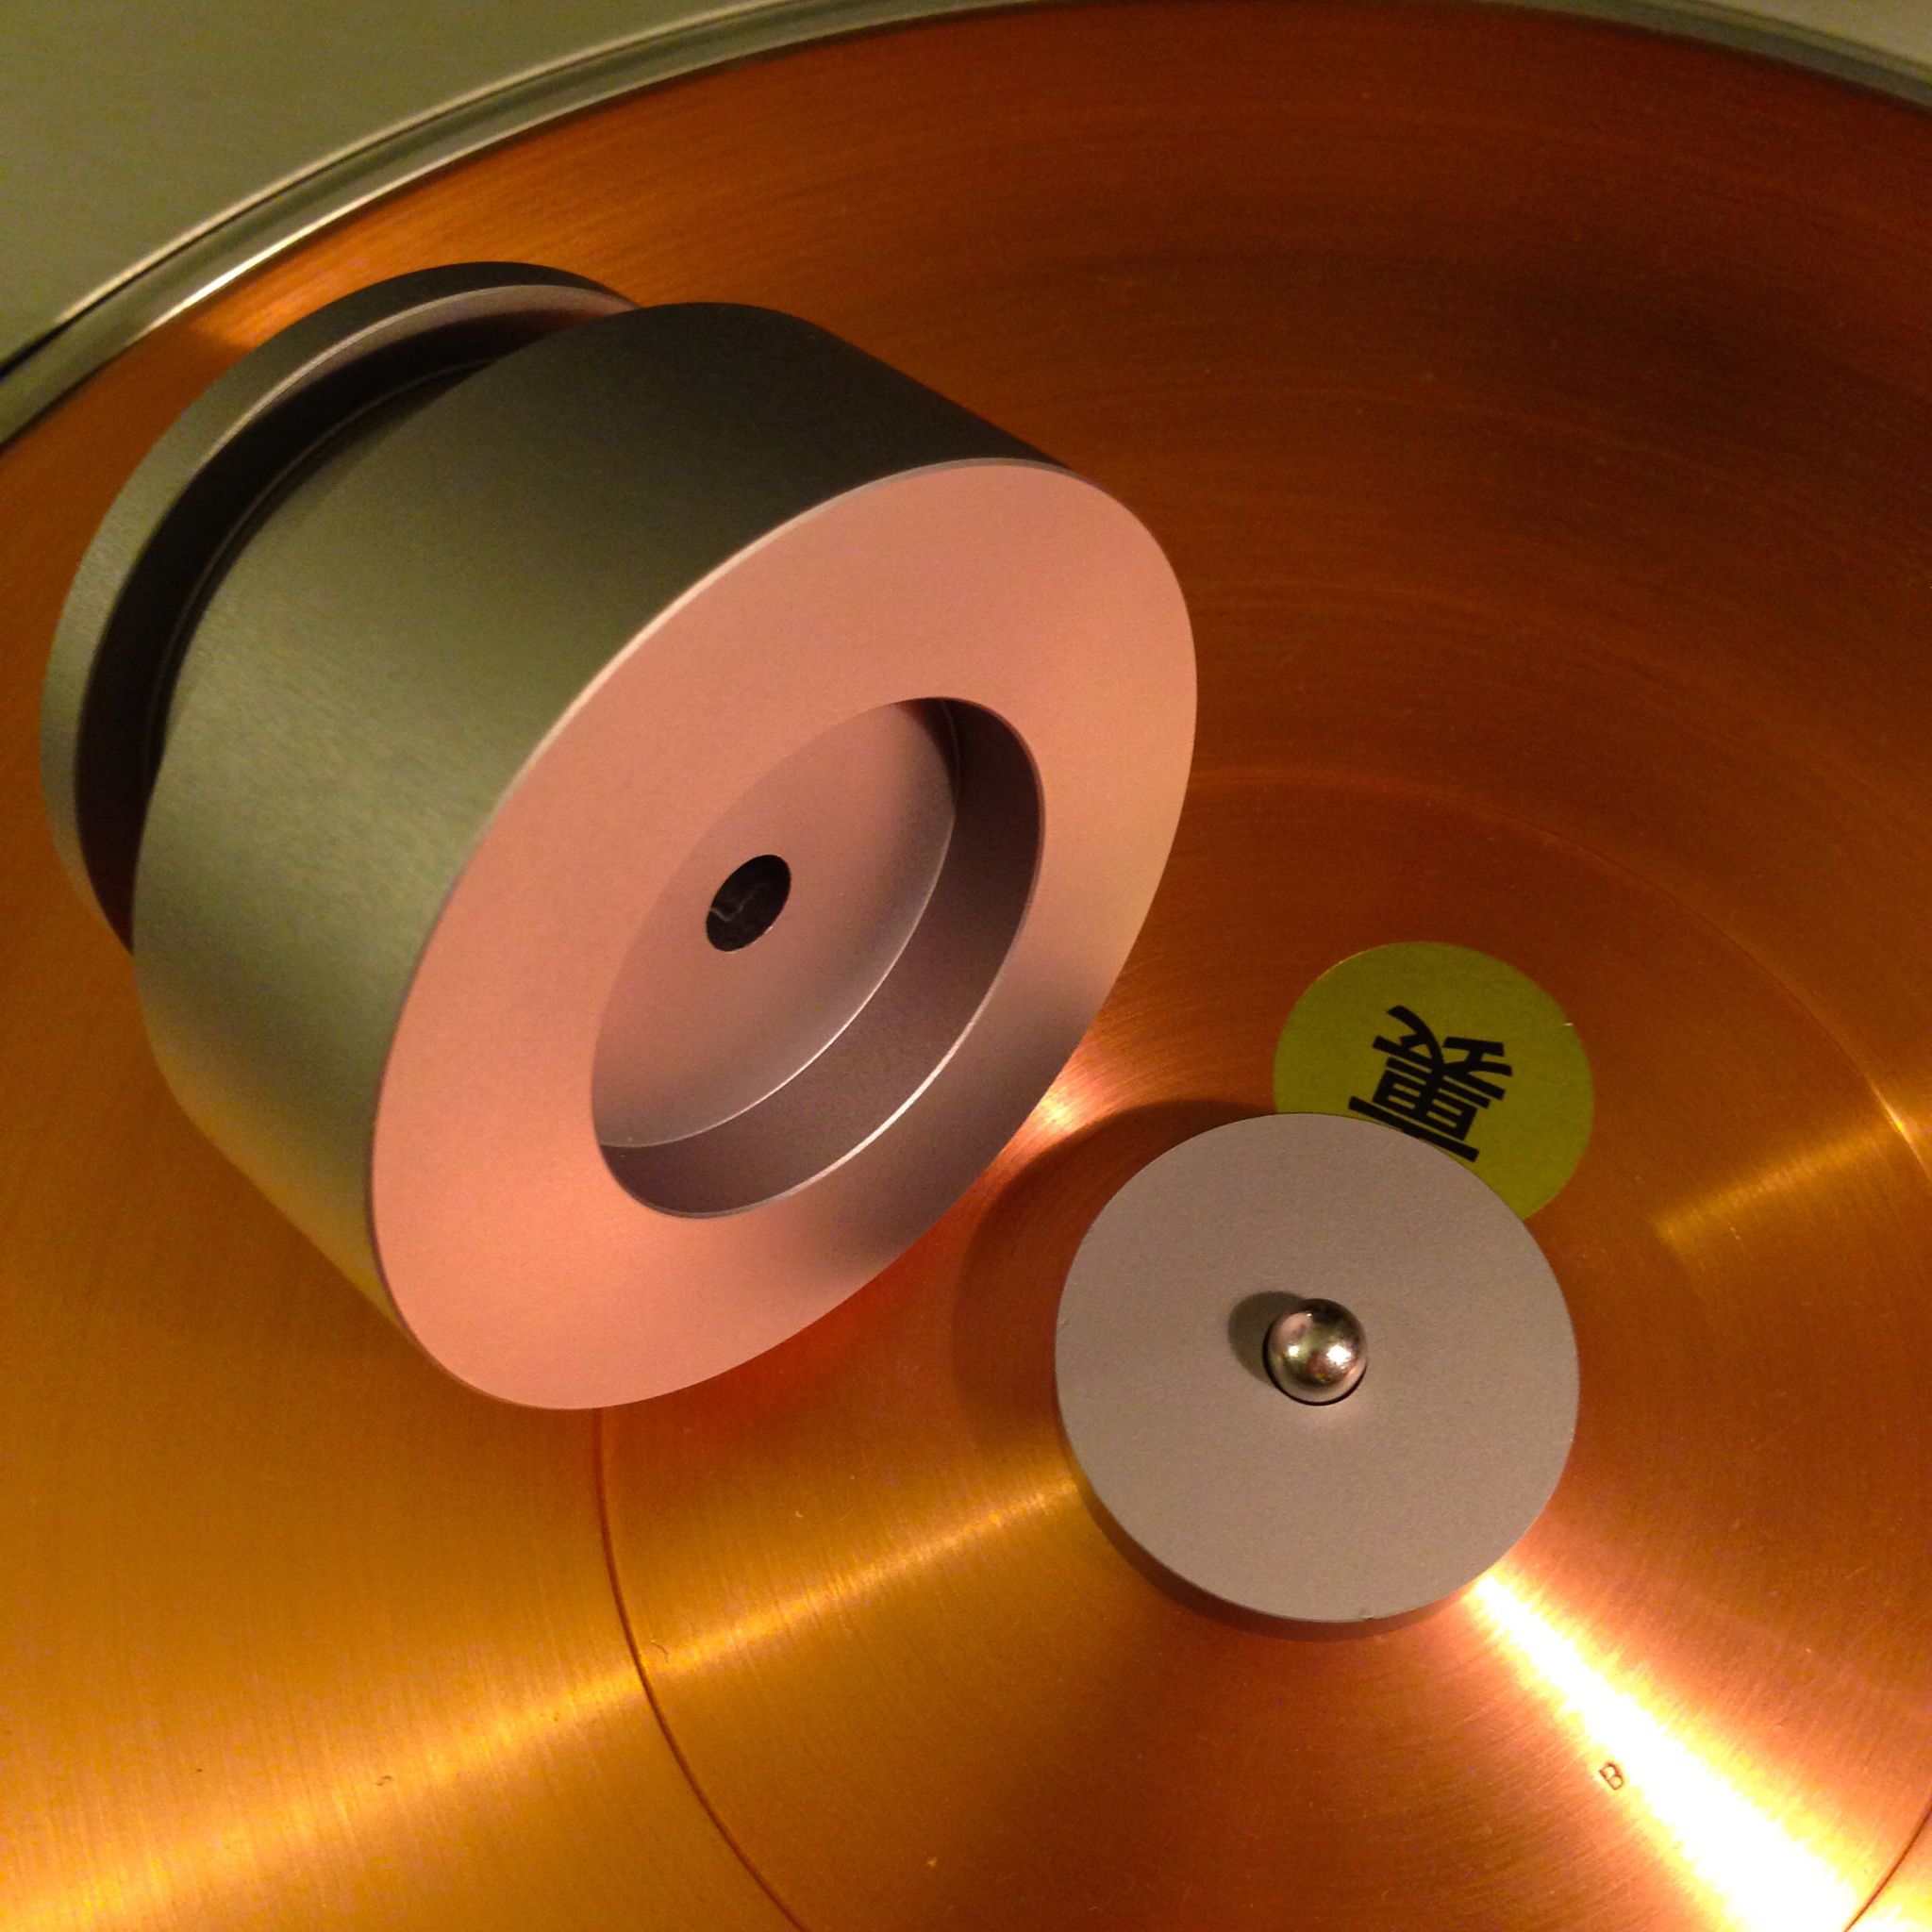 Custom made record weight for '7 inch records (45s)